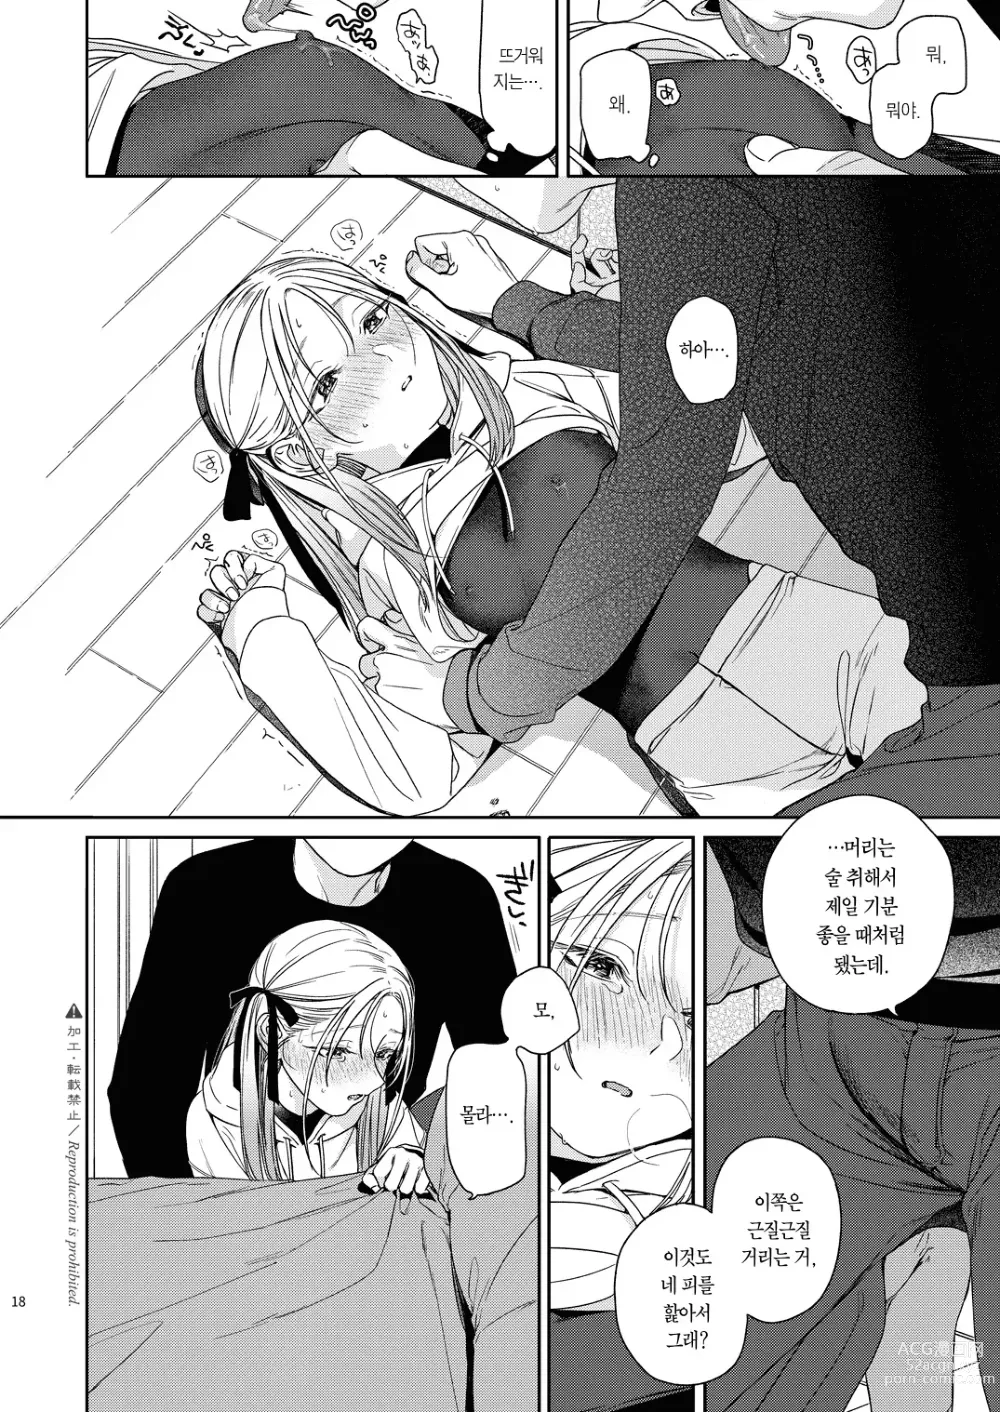 Page 19 of doujinshi 카타미와 월맹